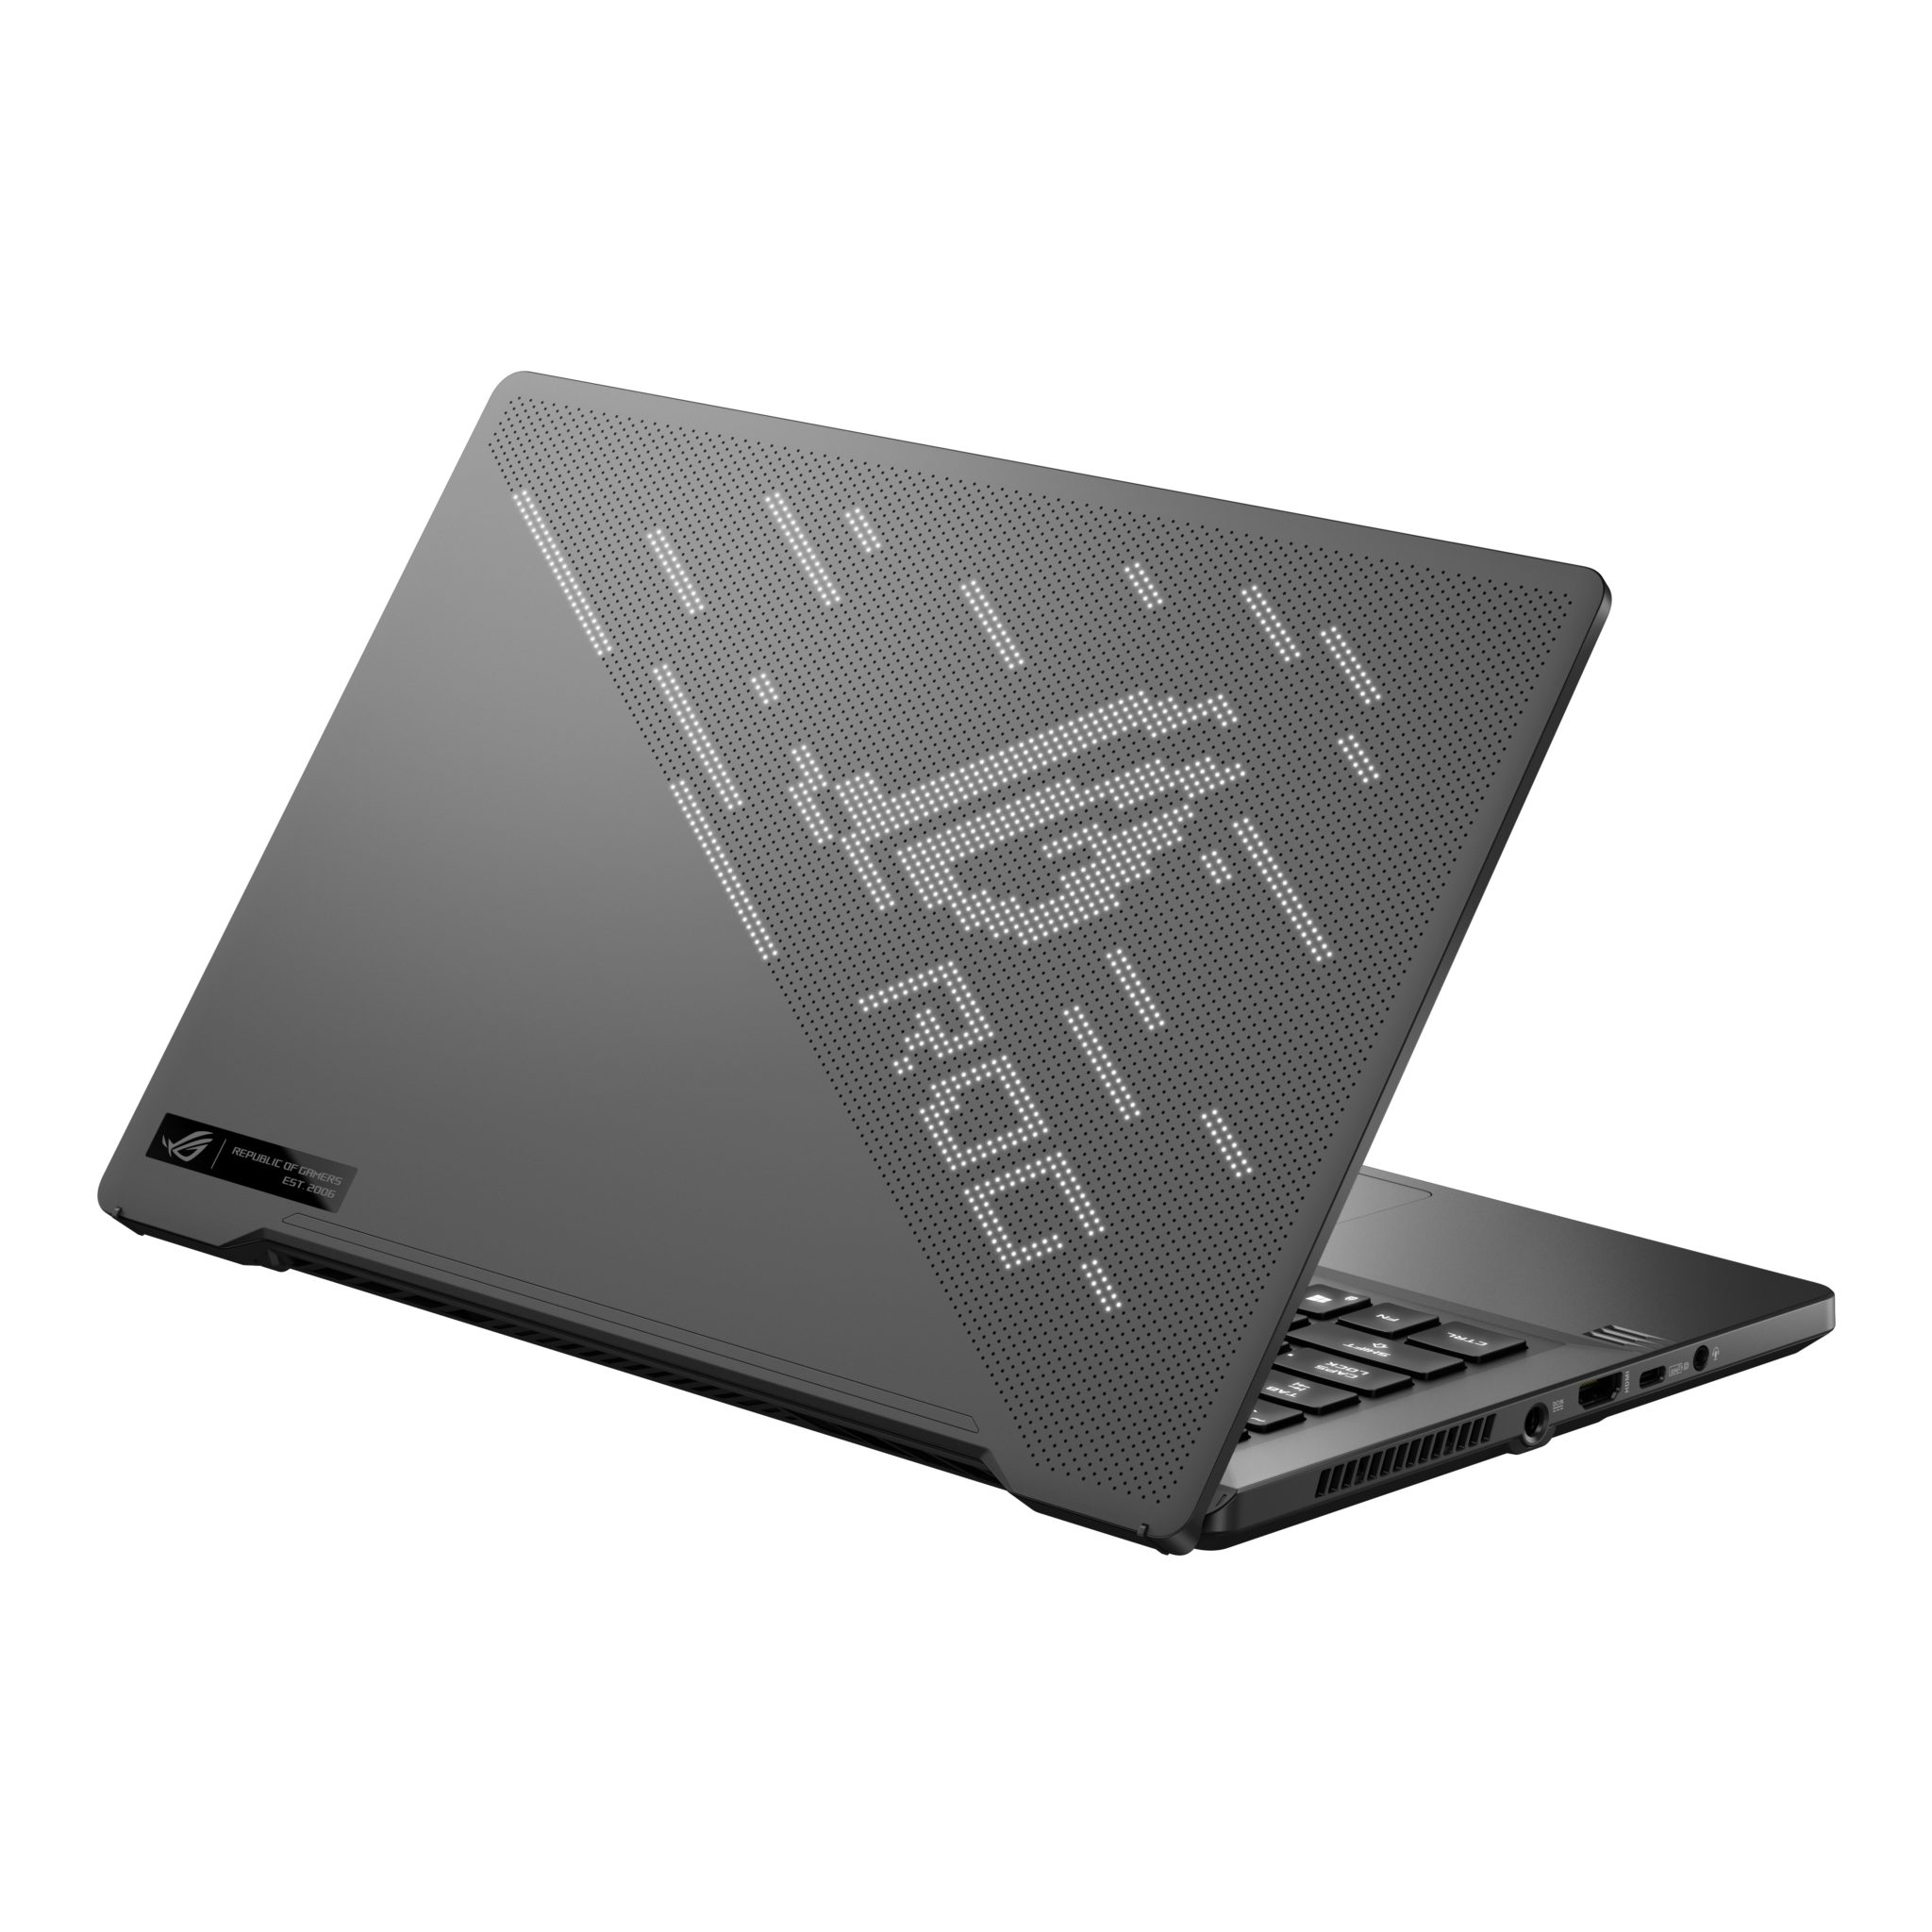 CES 2020: ASUS unveils Zephyrus G14 and Ryzen-powered TUF Gaming laptops